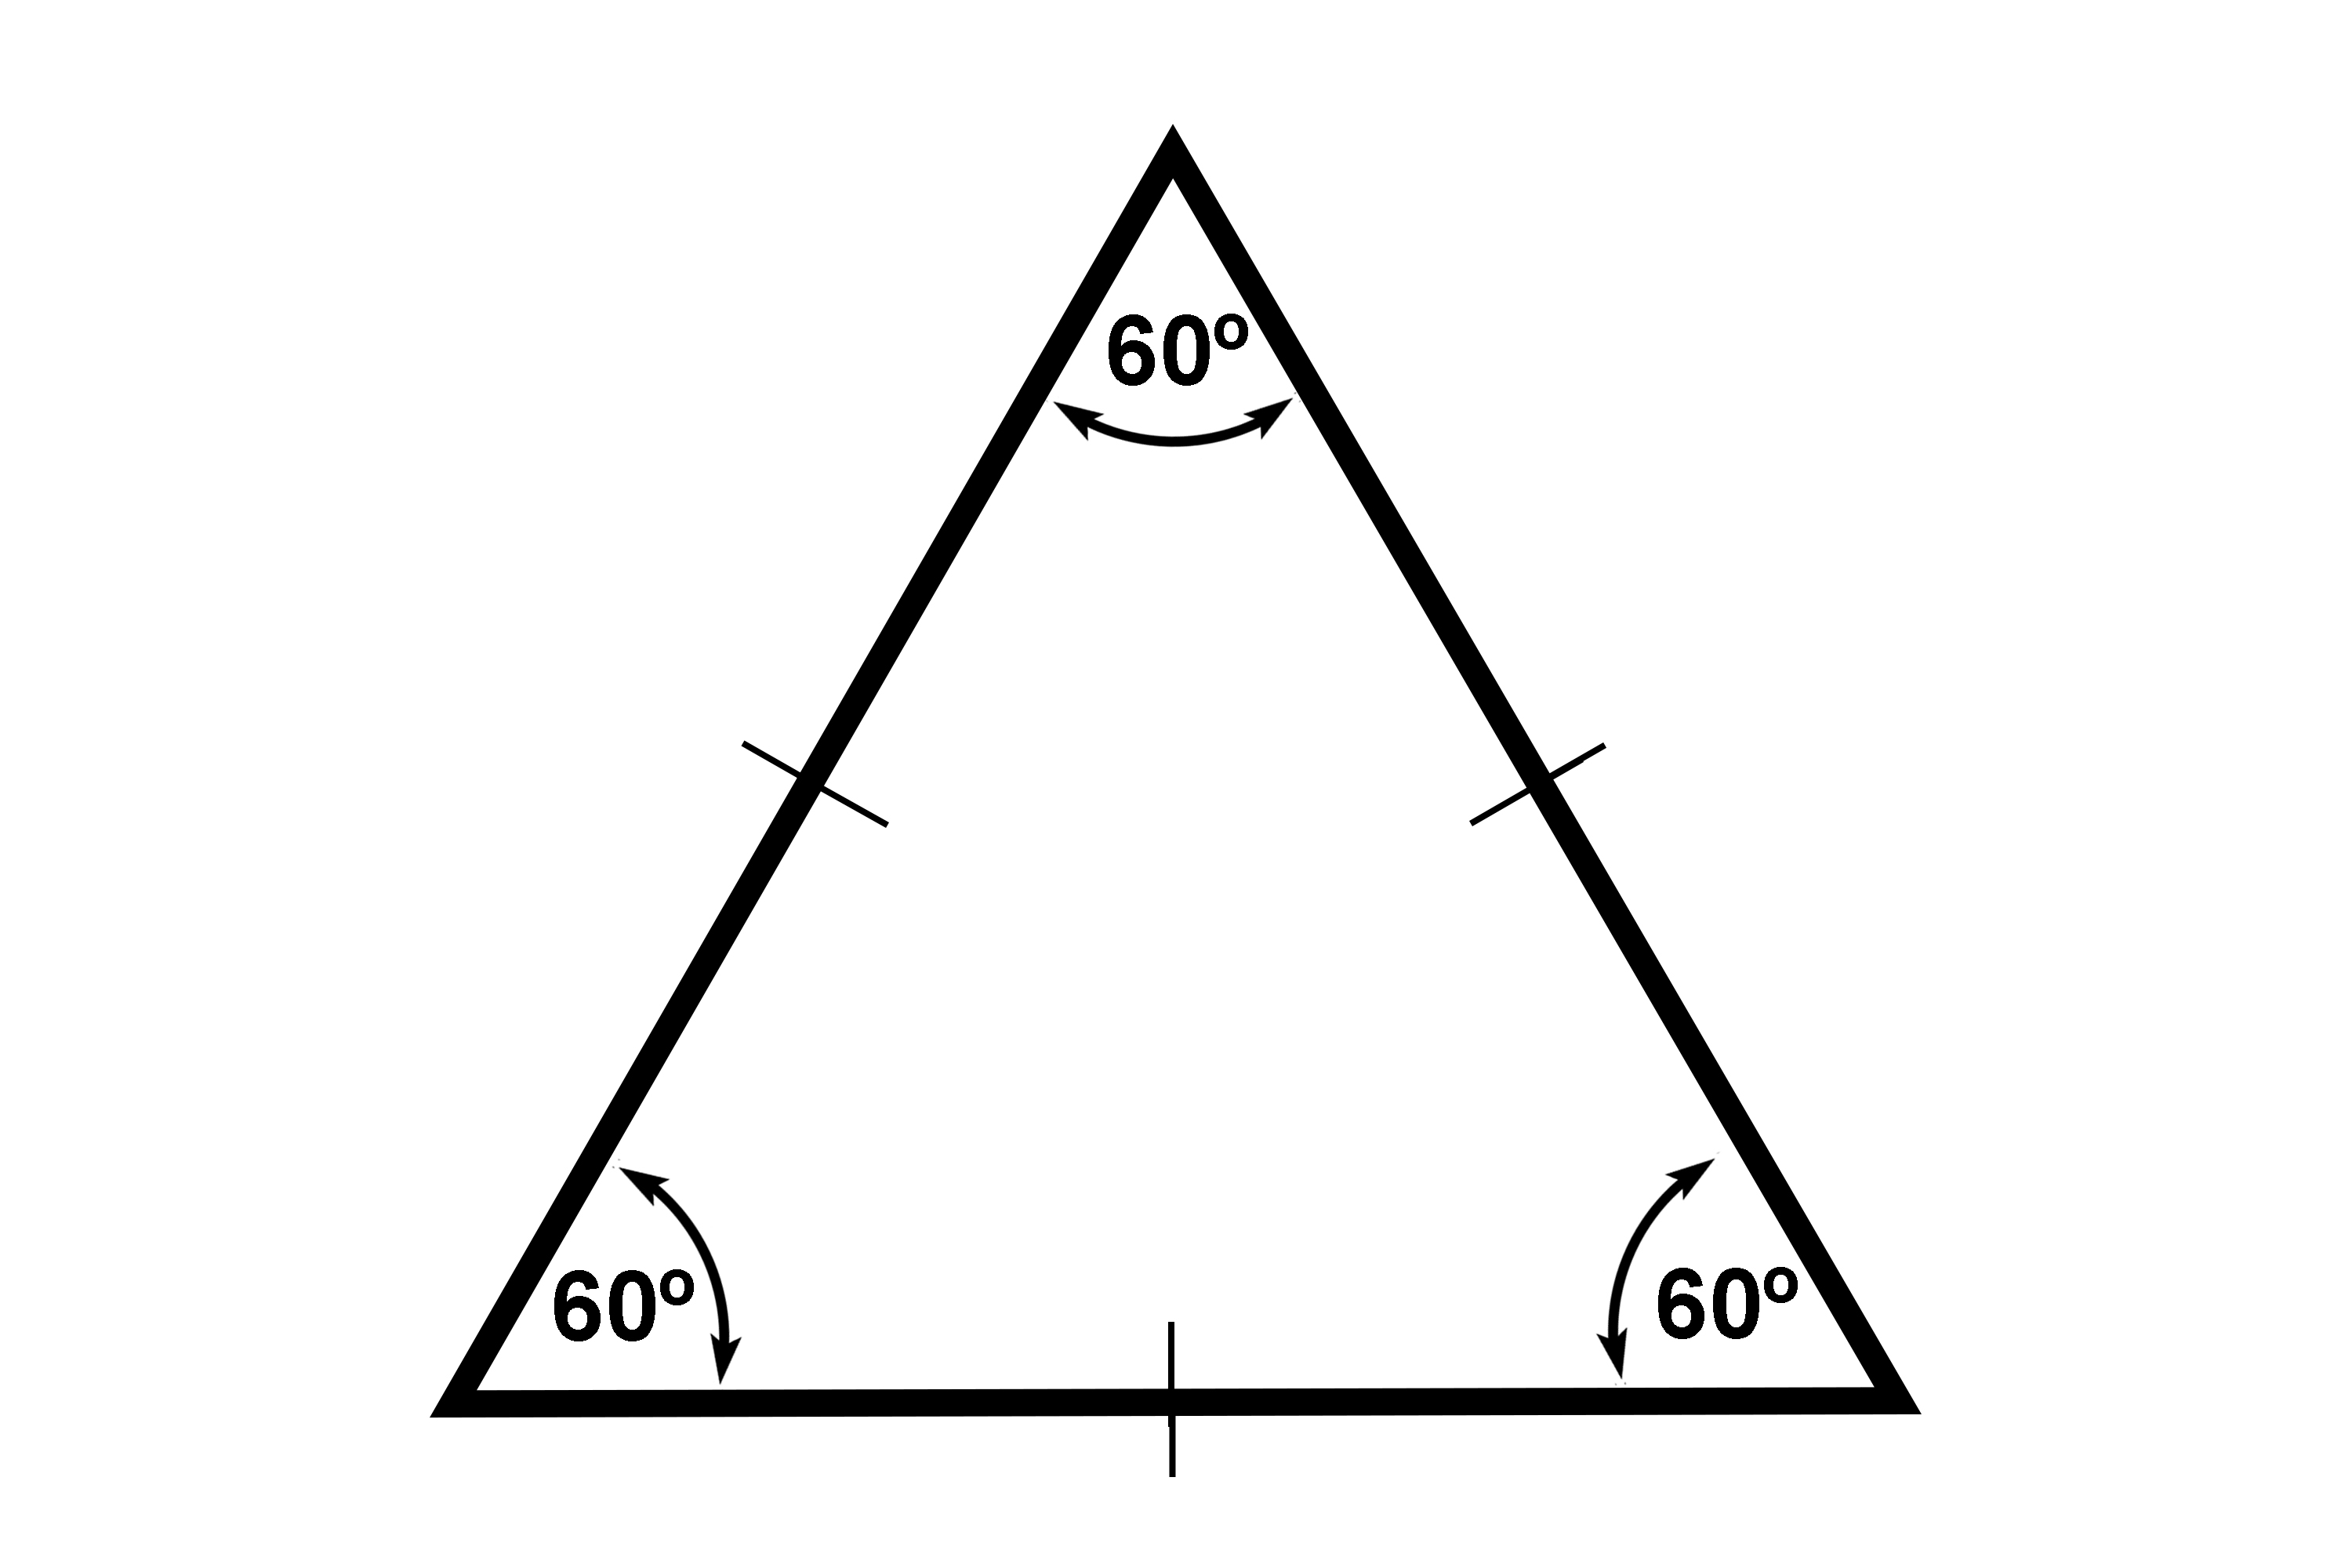 An equilateral has 360 degree corner angles